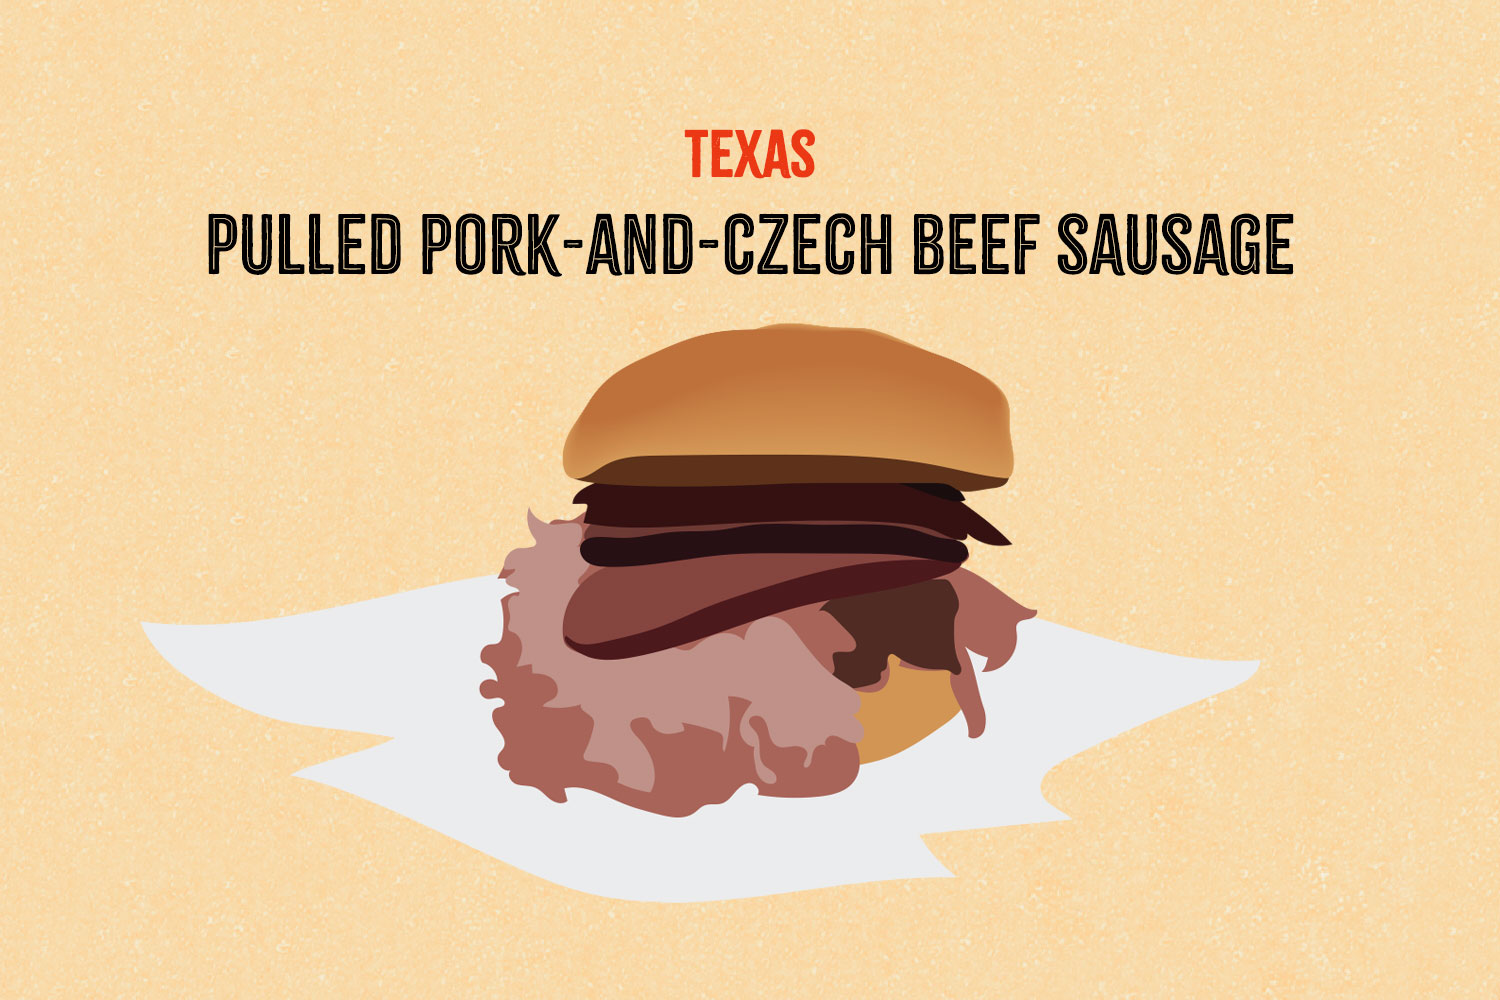 Pulled pork-and-Czech beef sausage illustration